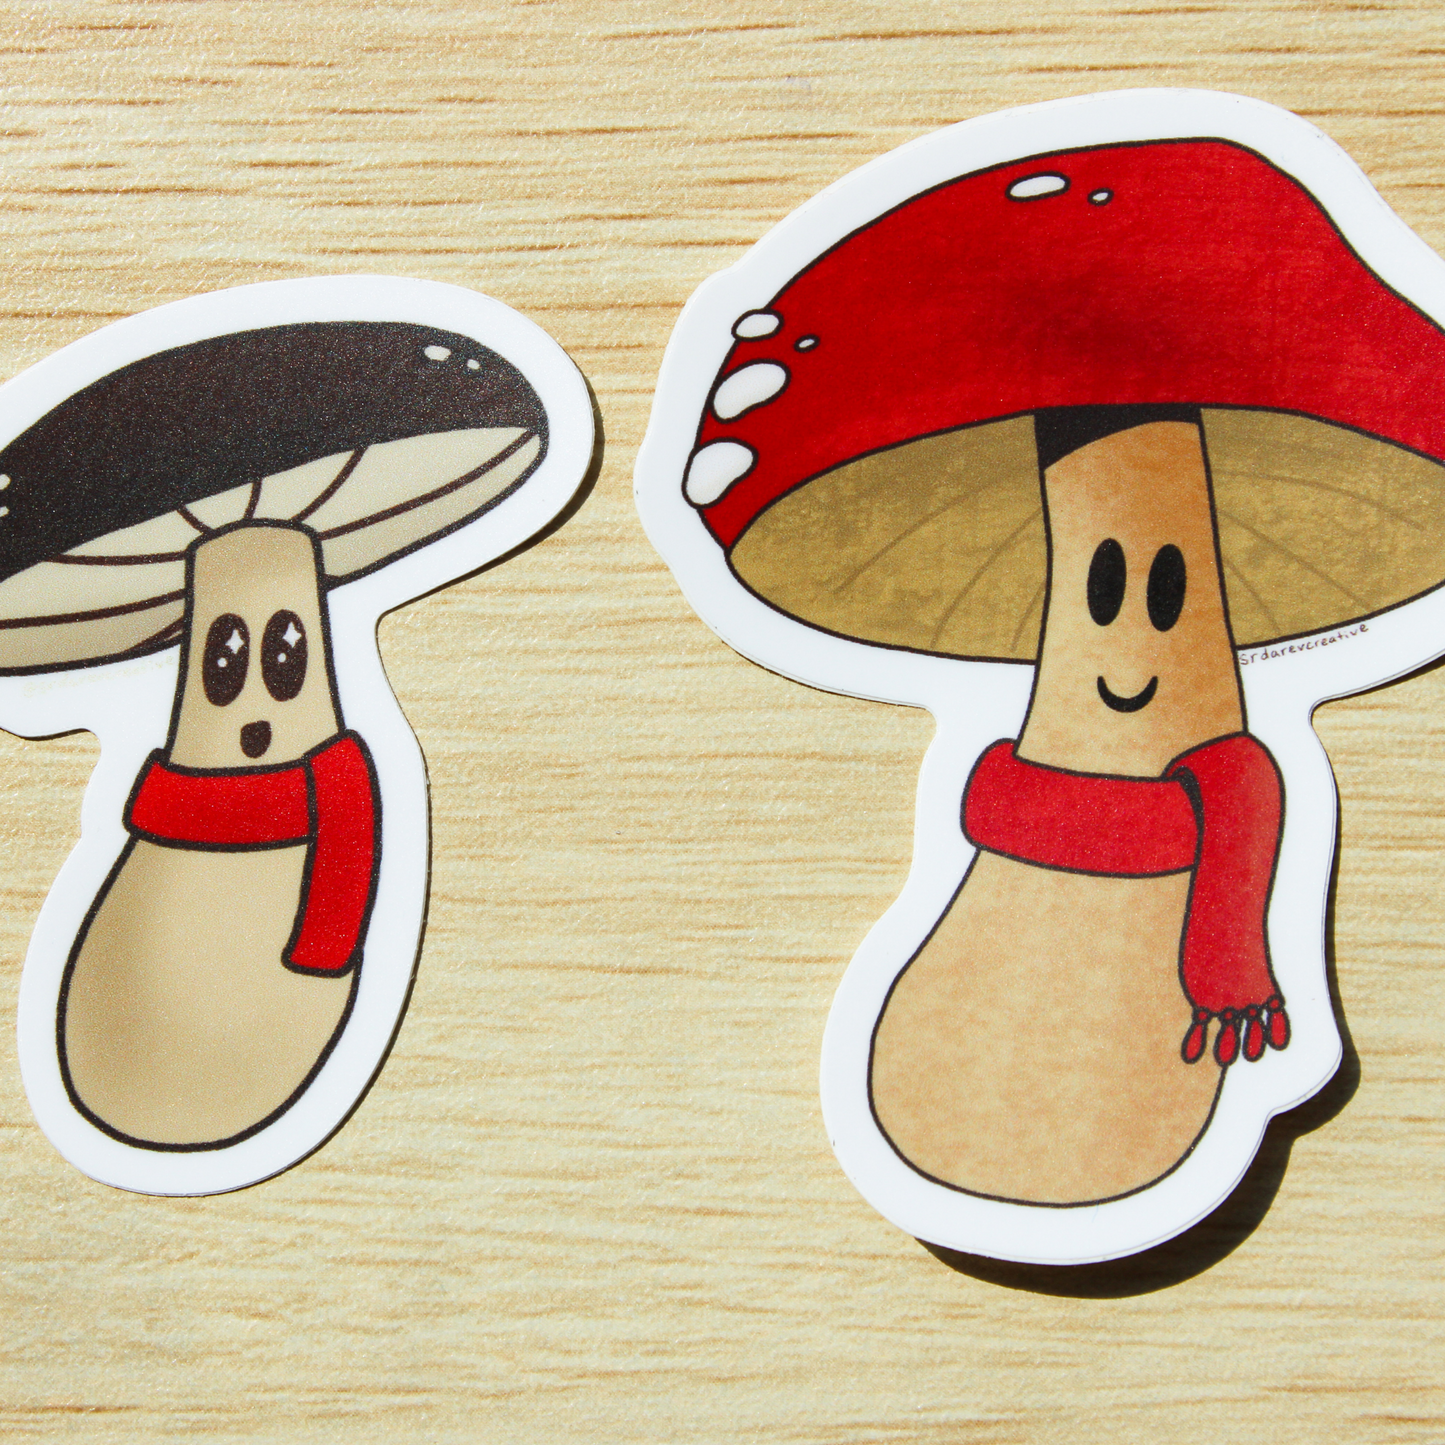 A brown wooden background. On top are two smiling mushroom stickers. On the left is a brown mushroom with a red scarf and on the right is a red mushroom with a red scarf.